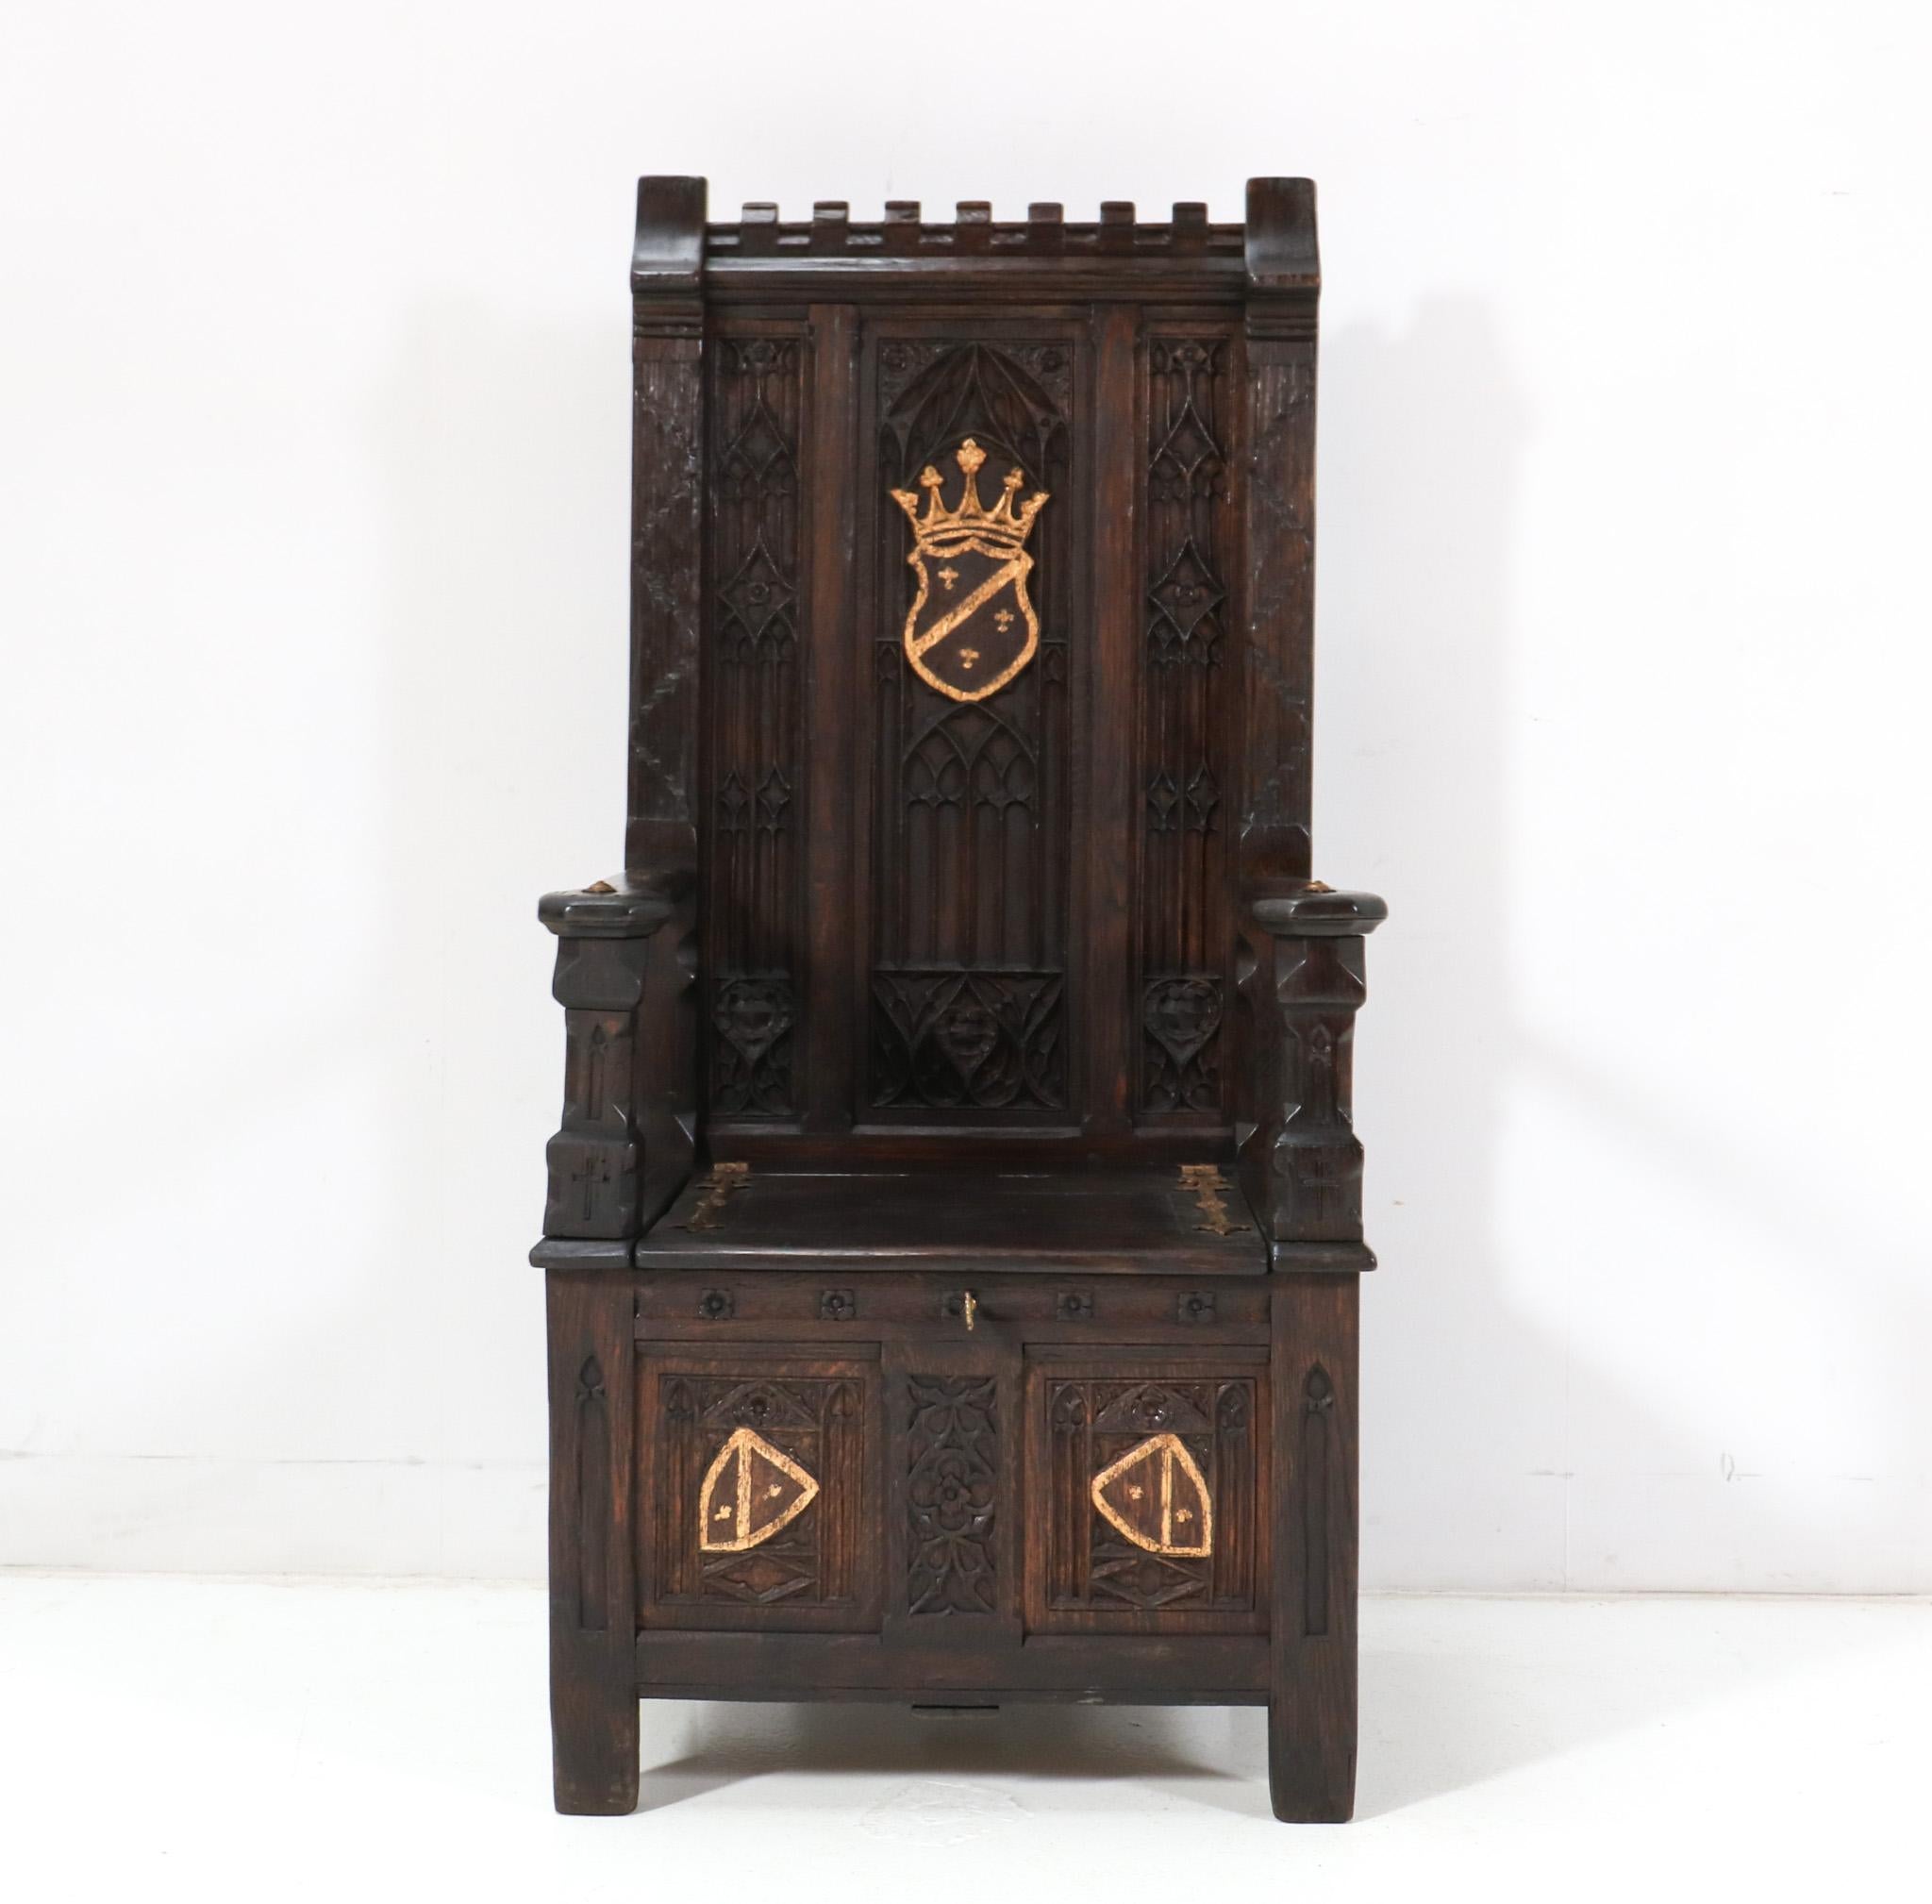 Amazing and rare Gothic Revival throne chair.
Striking Dutch design from the 1900s.
Solid oak high back Bishop's throne chair with original hand-carved elements and gilt coat of arms.
The seat can be opened for storage and can locked also with